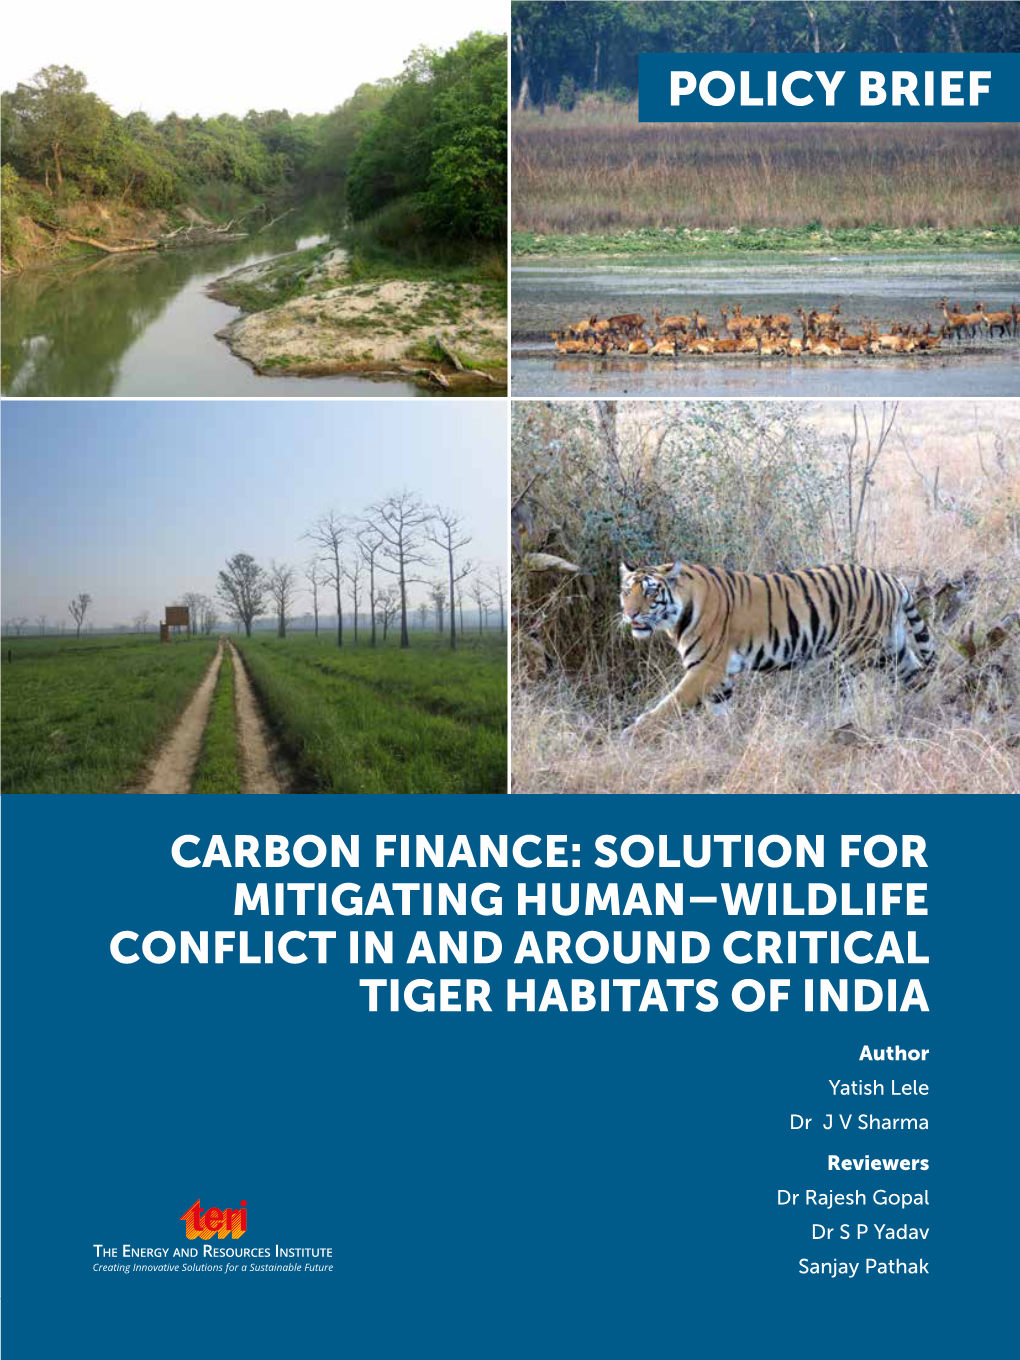 Carbon Finance: Solution for Mitigating Human–Wildlife Conflict in and Around Critical Tiger Habitats of India